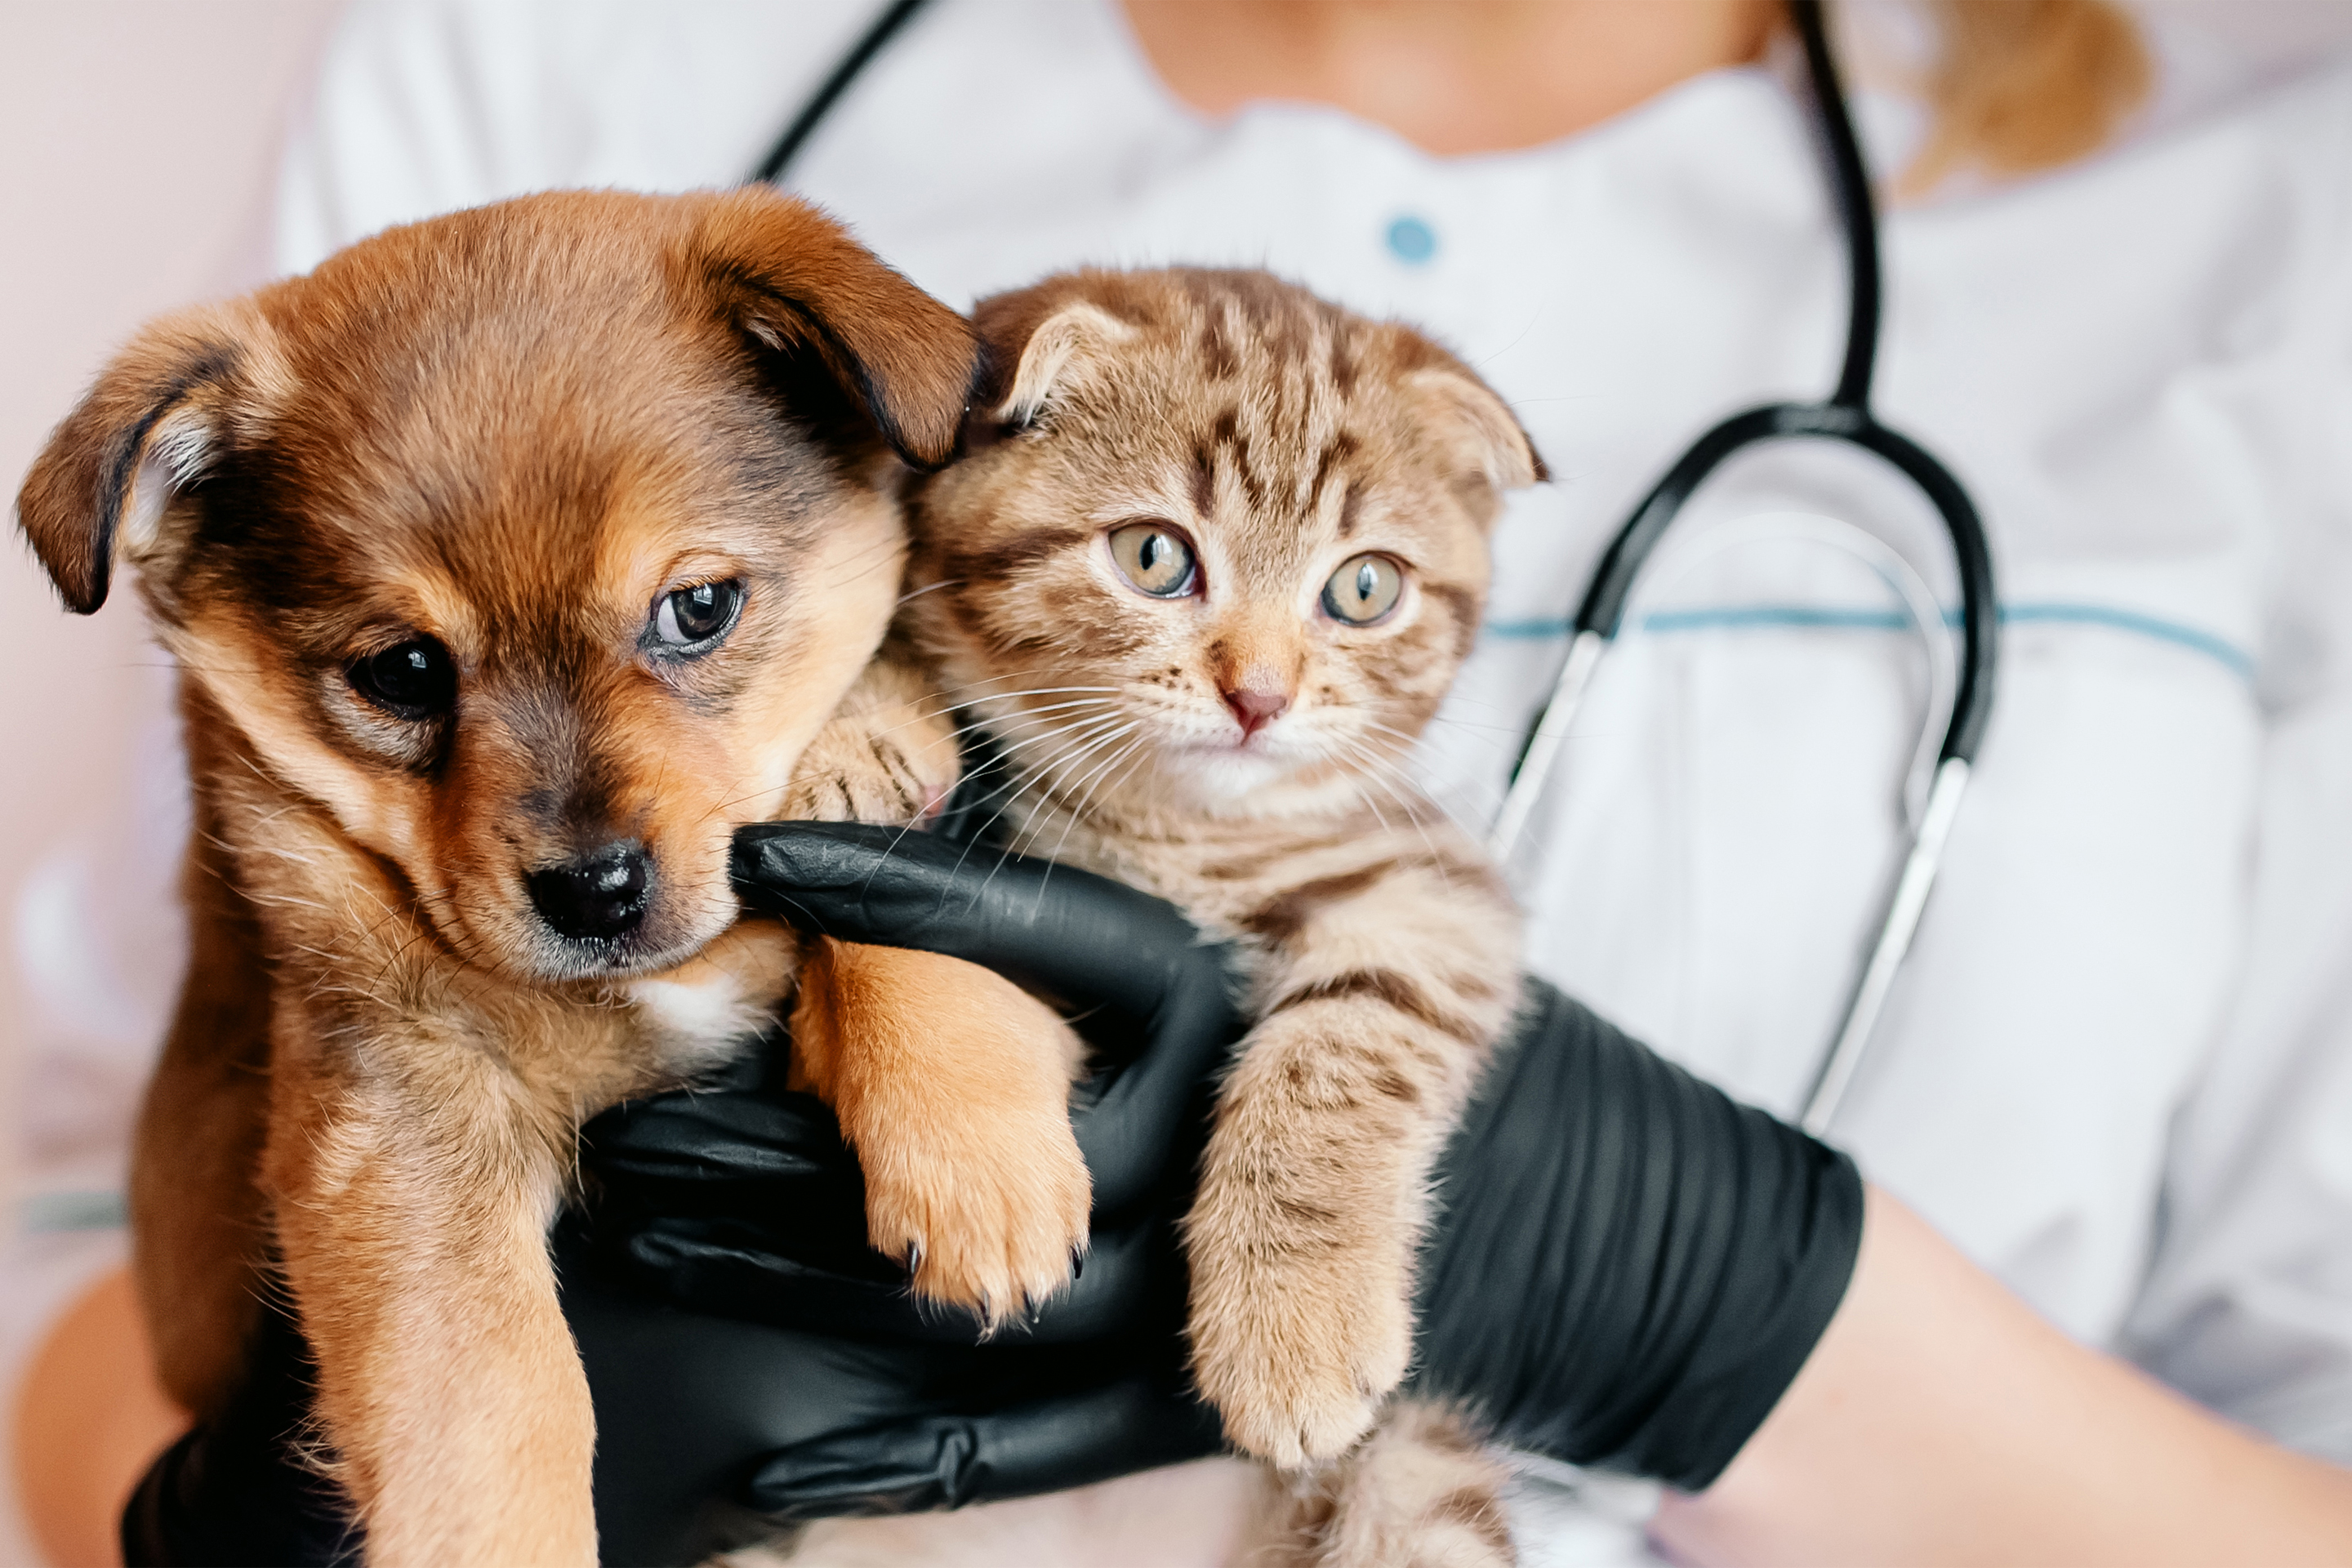 animal health insurance for cats